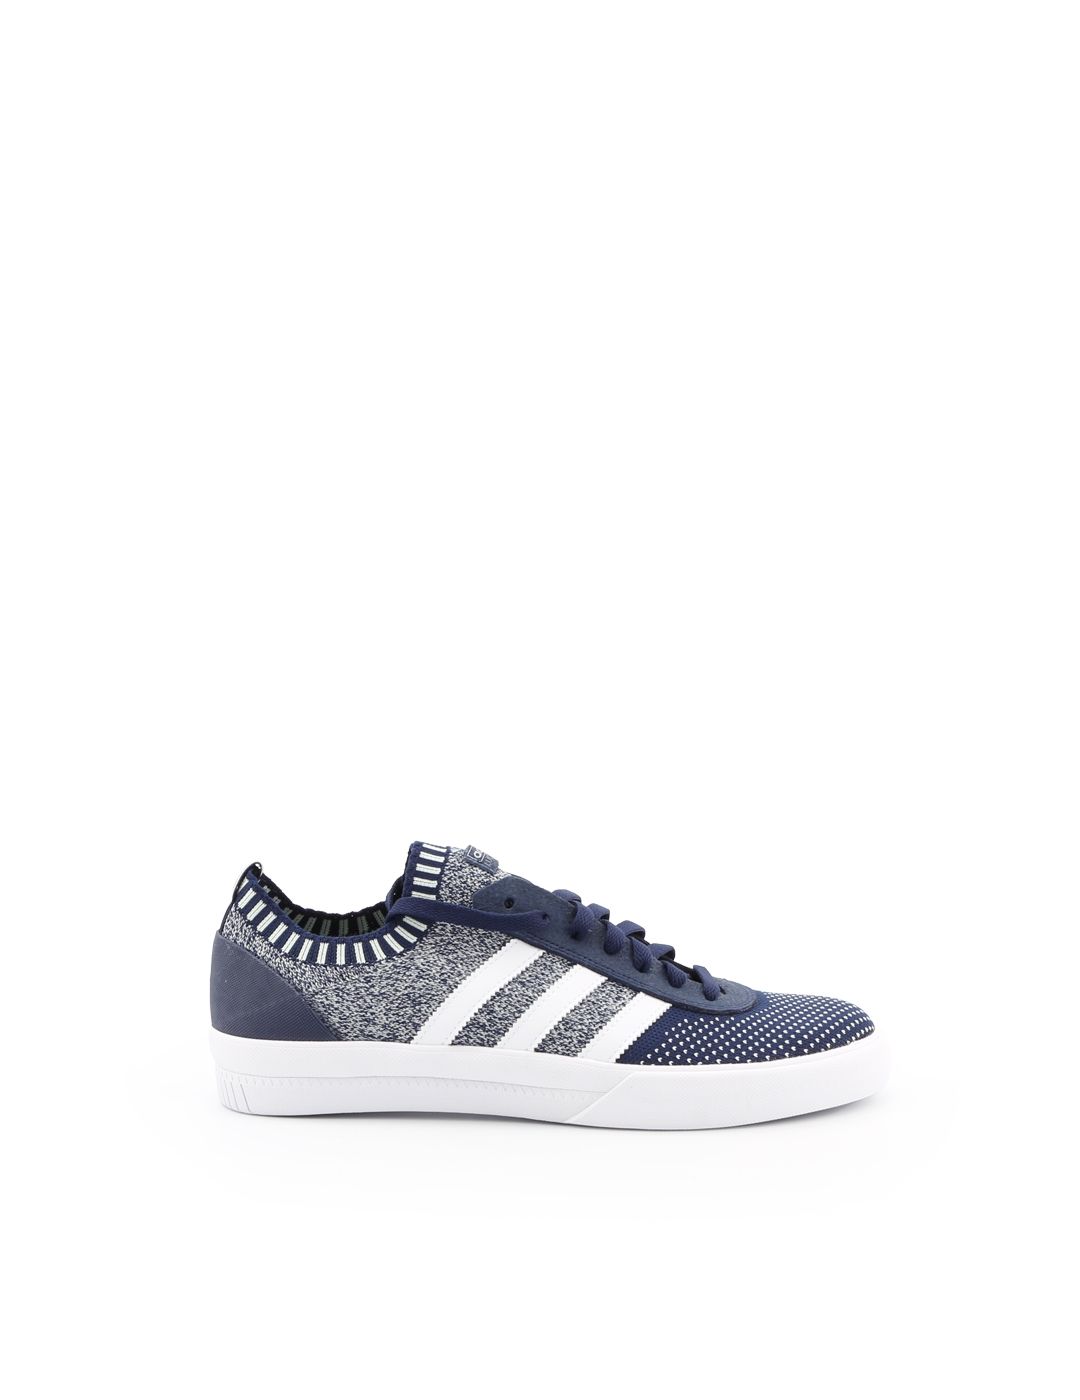 ADIDAS MEN'S CQ1226 BLUE LEATHER SNEAKERS